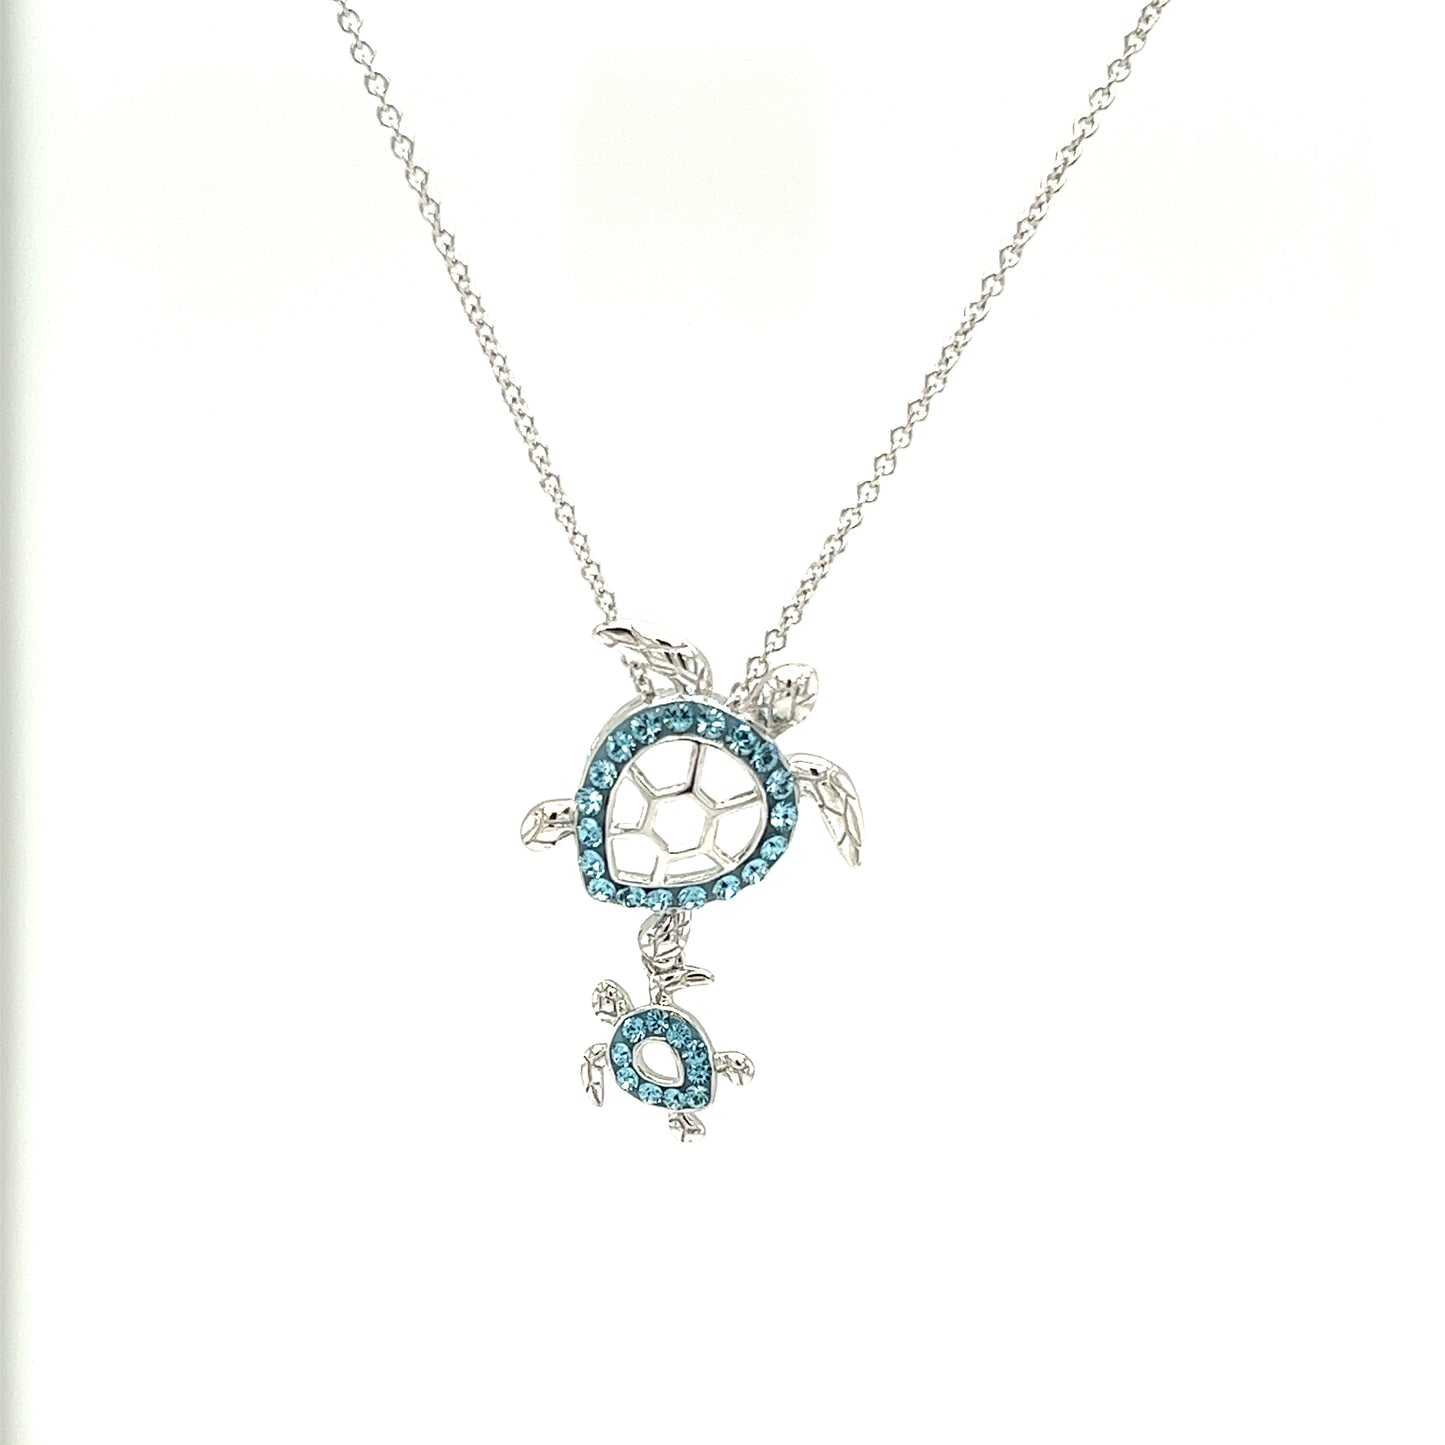 Mother and Baby Sea Turtle Necklace with Aqua Crystals in Sterling Silver Front View